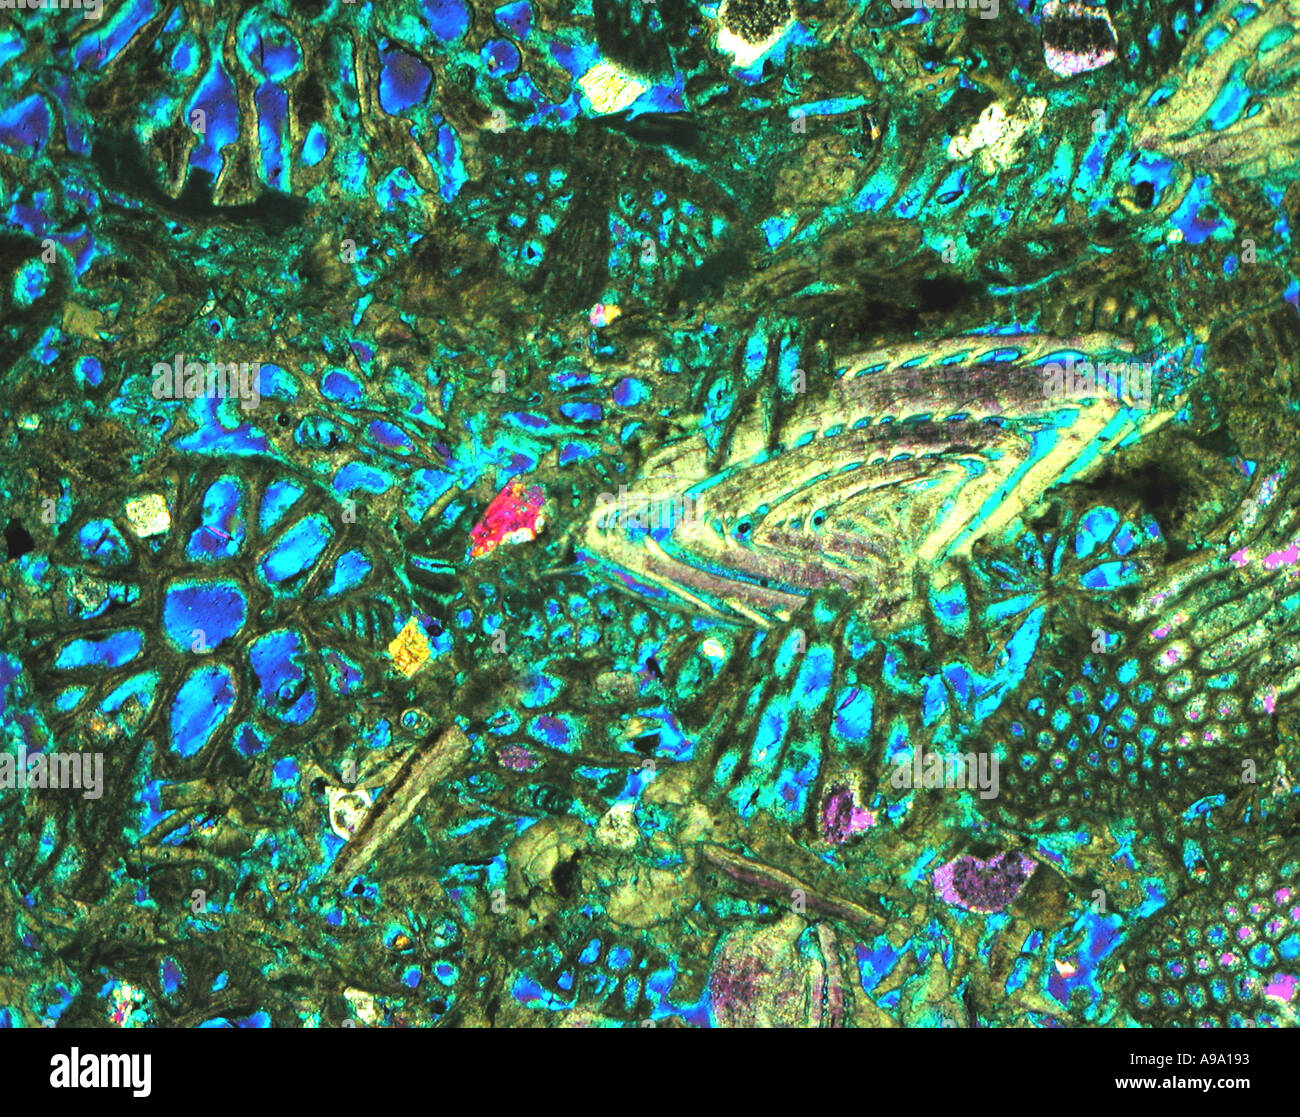 Oolitic limestone Oamaru N Z Ground thin section showing fossil forams Crossed polars plus tint  Stock Photo